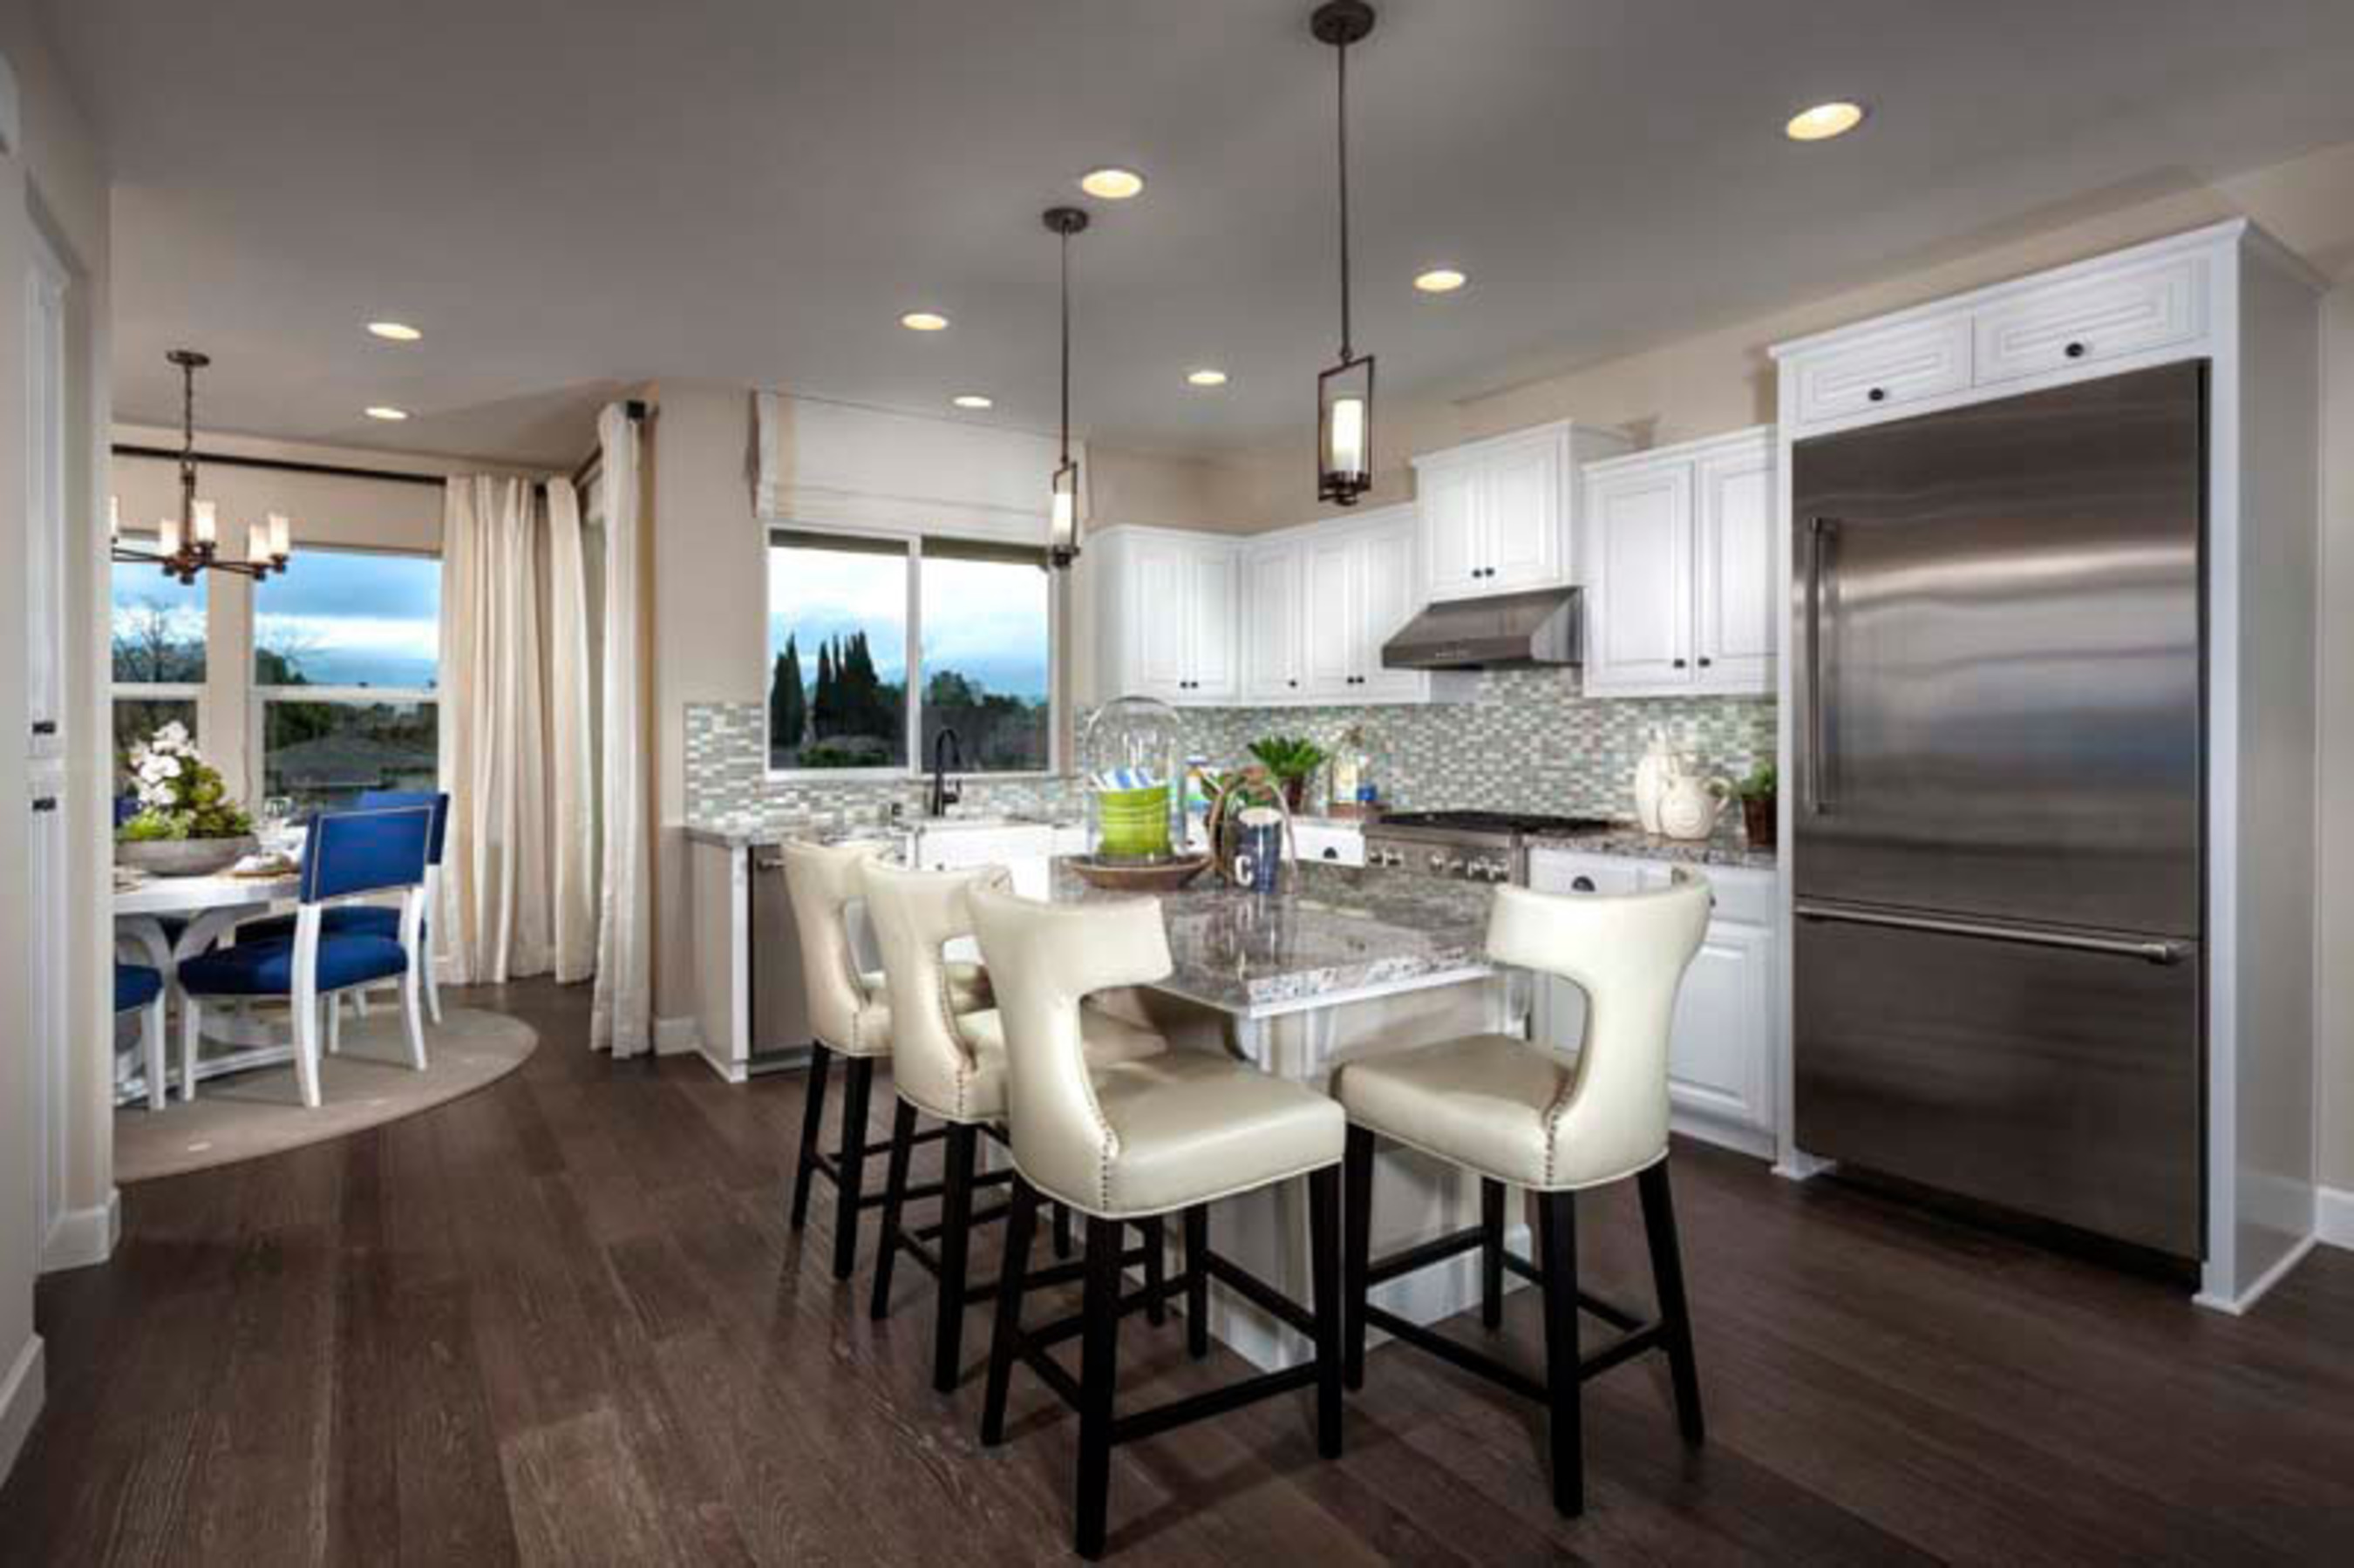 Standard Pacific Homes Announces the Grand Opening of Westmount, a brand new community in San Jose. Westmount will offer seven unique attached and cottage-style home designs. The model home debuts on Saturday, April 12. For more information, visit standardpacifichomes.com. (PRNewsFoto/Standard Pacific Homes) (PRNewsFoto/STANDARD PACIFIC HOMES)